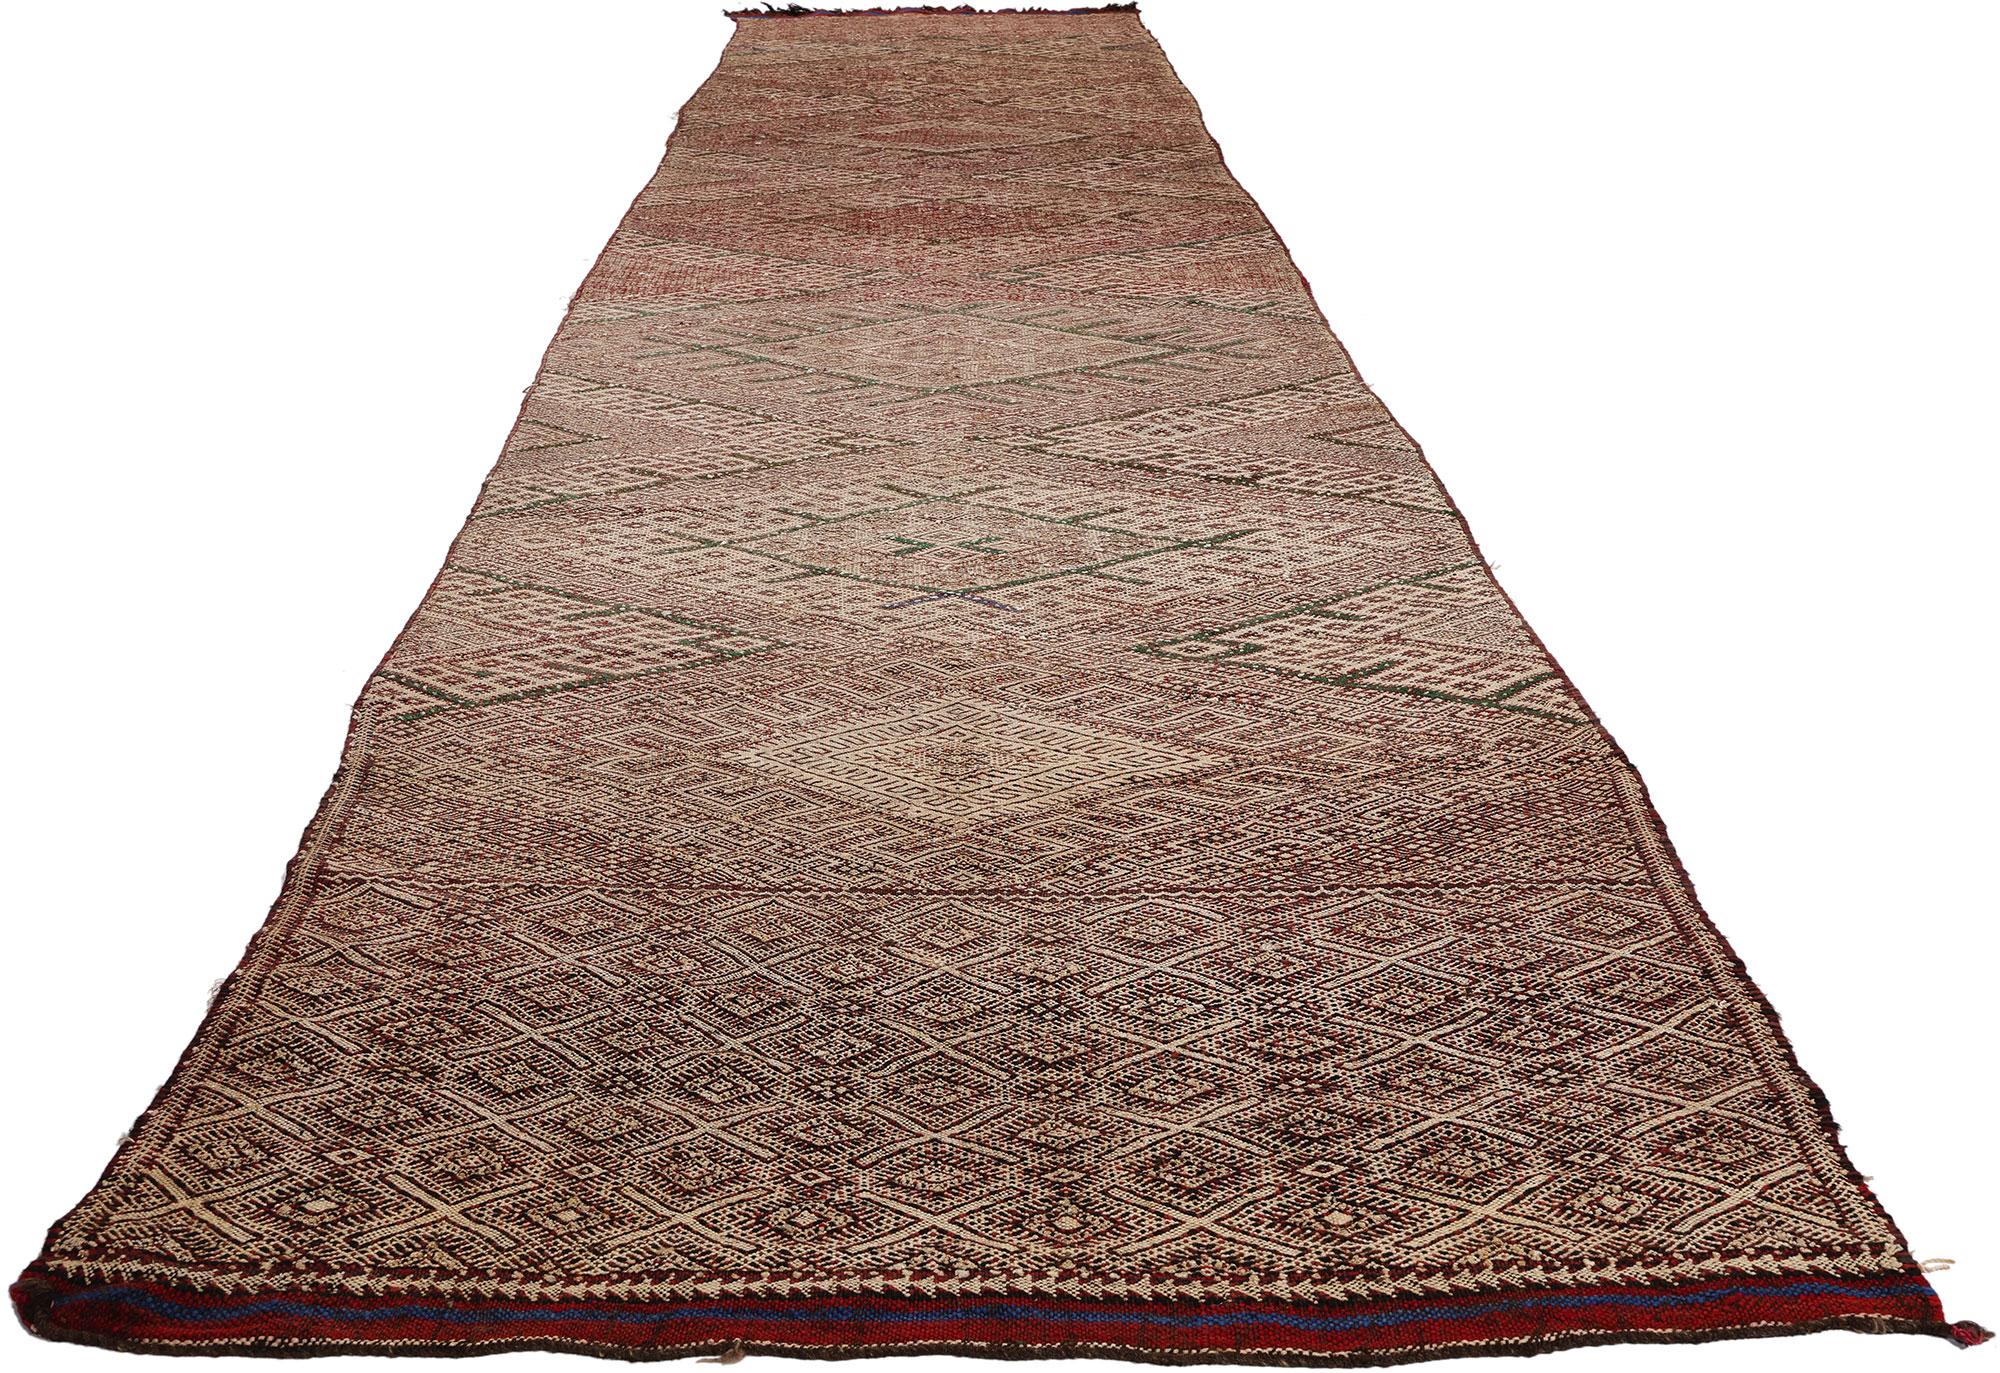 Hand-Woven Midcentury Bohemian Vintage Moroccan Zemmour Kilim Berber Rug, 03'04 x 17'06 For Sale